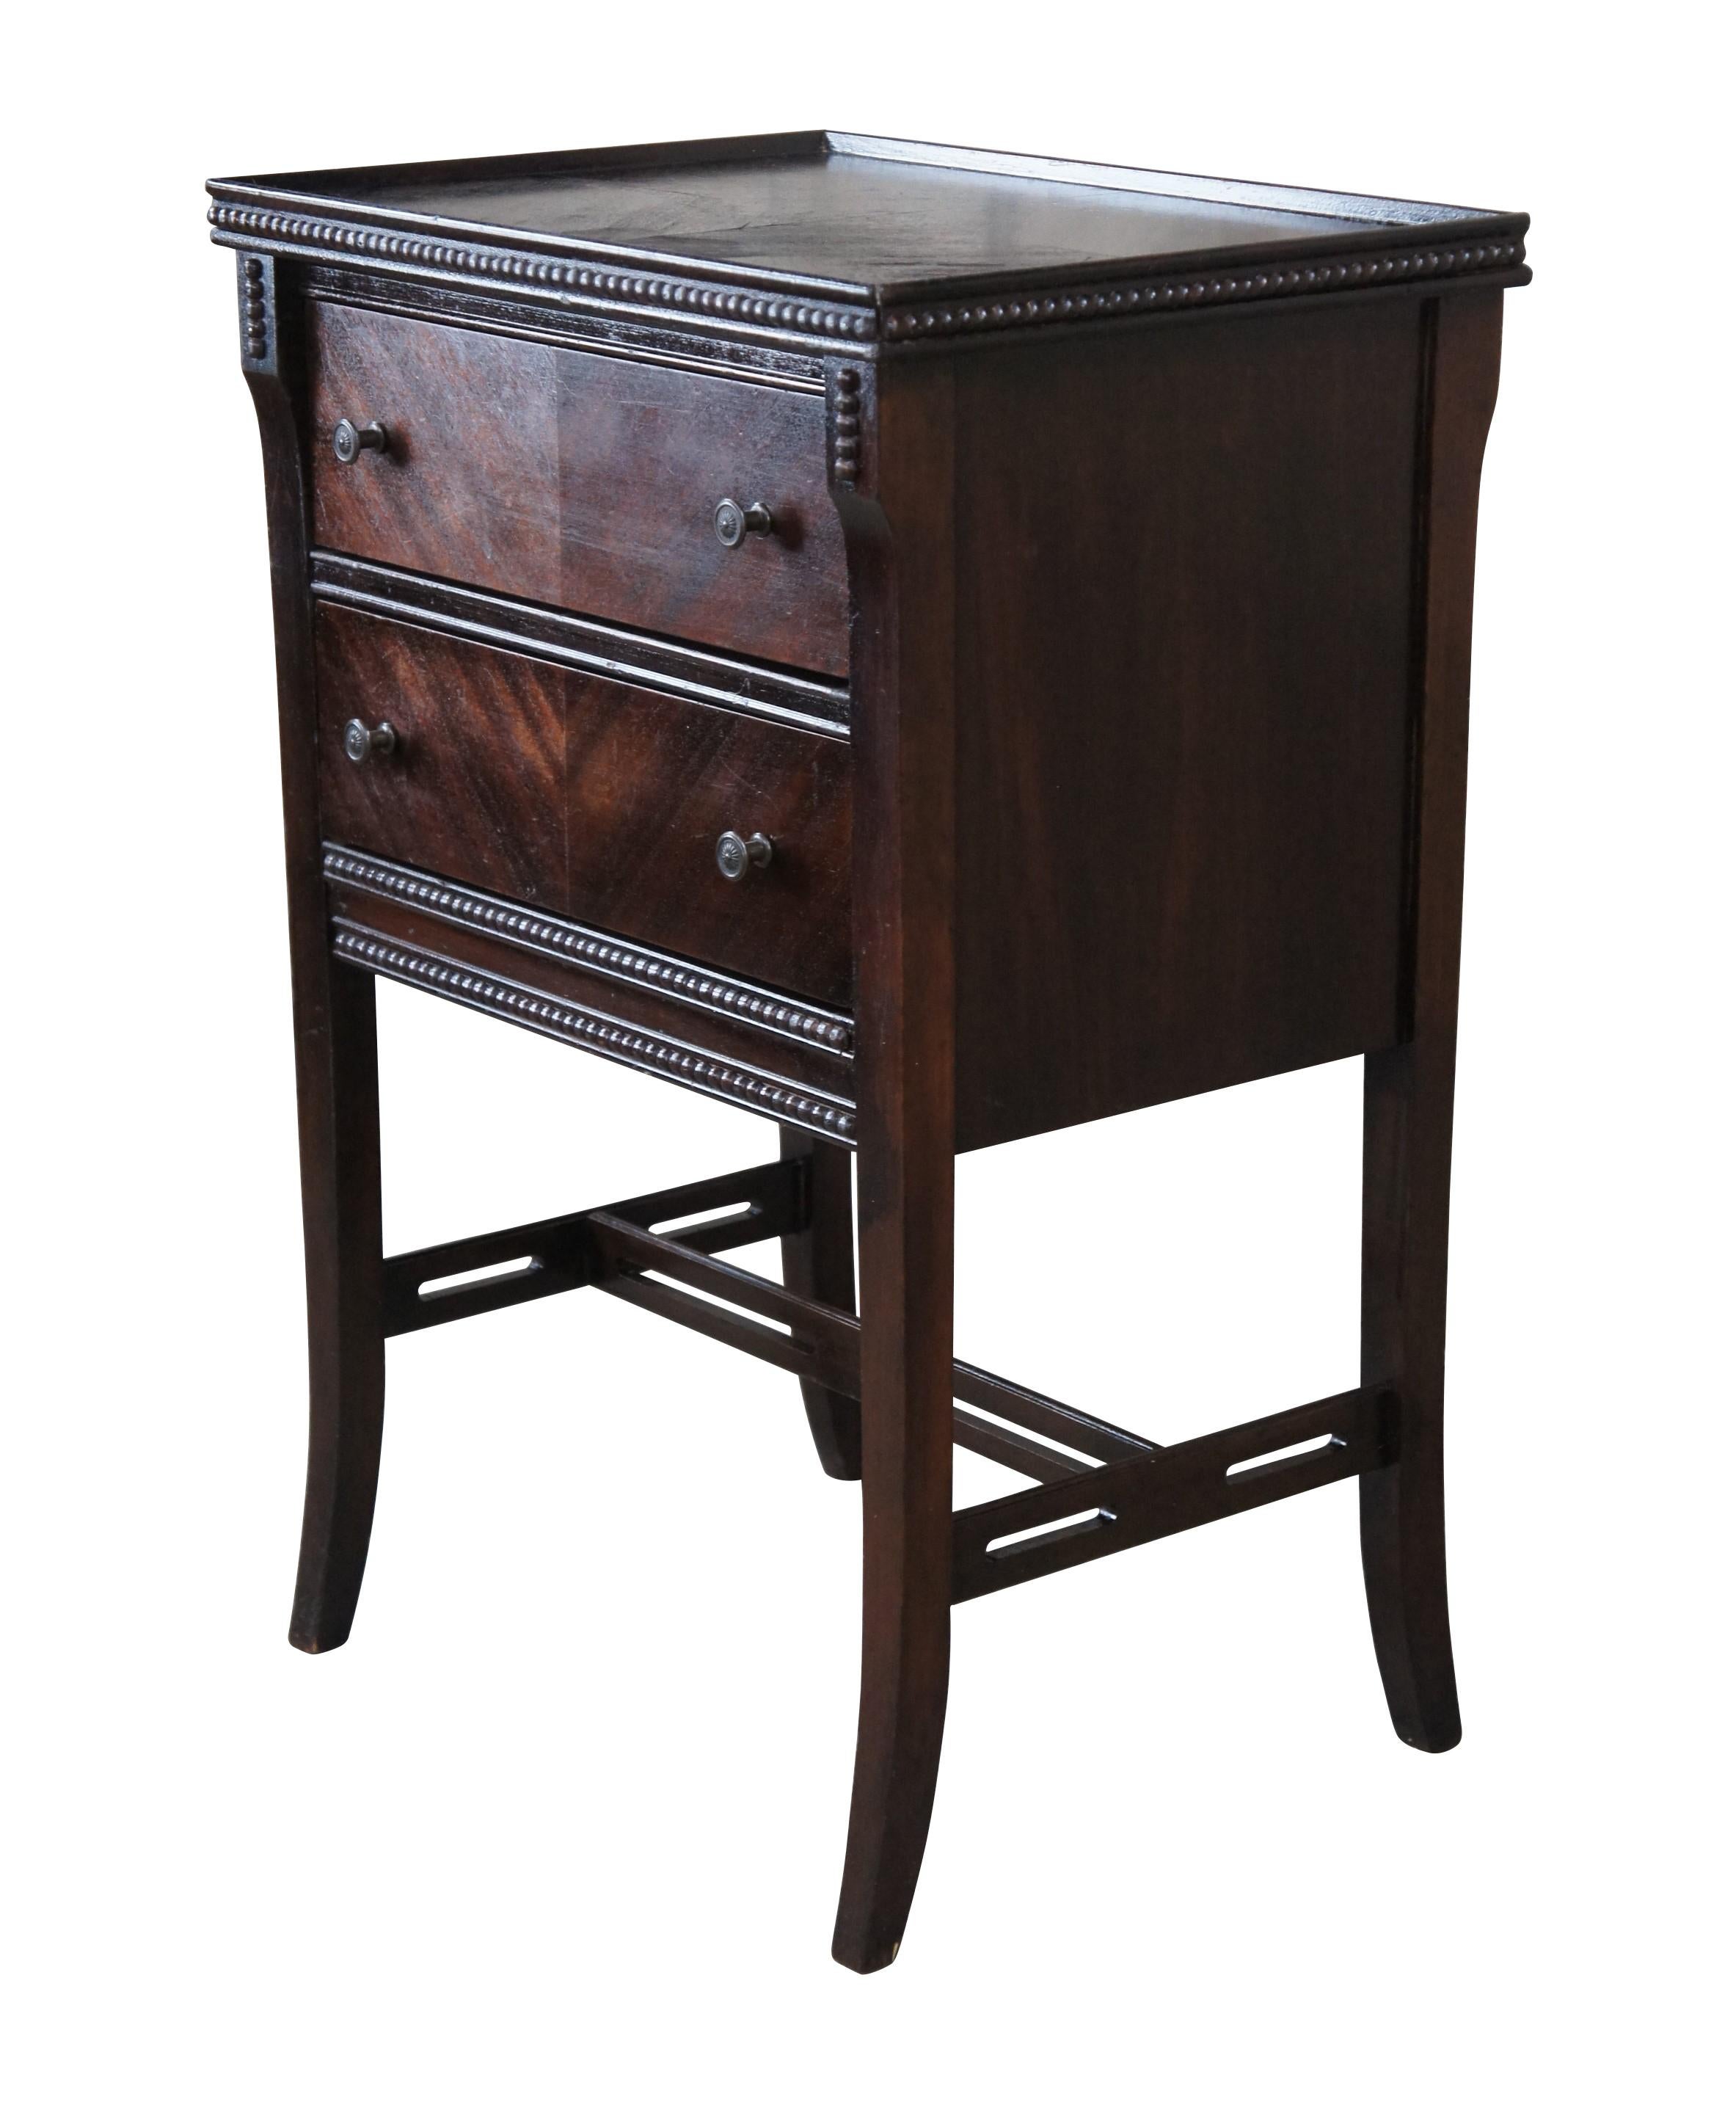 A lovely mid century mahogany nightstand.  Features a rectangular frame with two matchbook V grain drawers, an inset top and beaded trim.  The table is raised over flared legs with pierced stretchers.  

Dimensions:
19